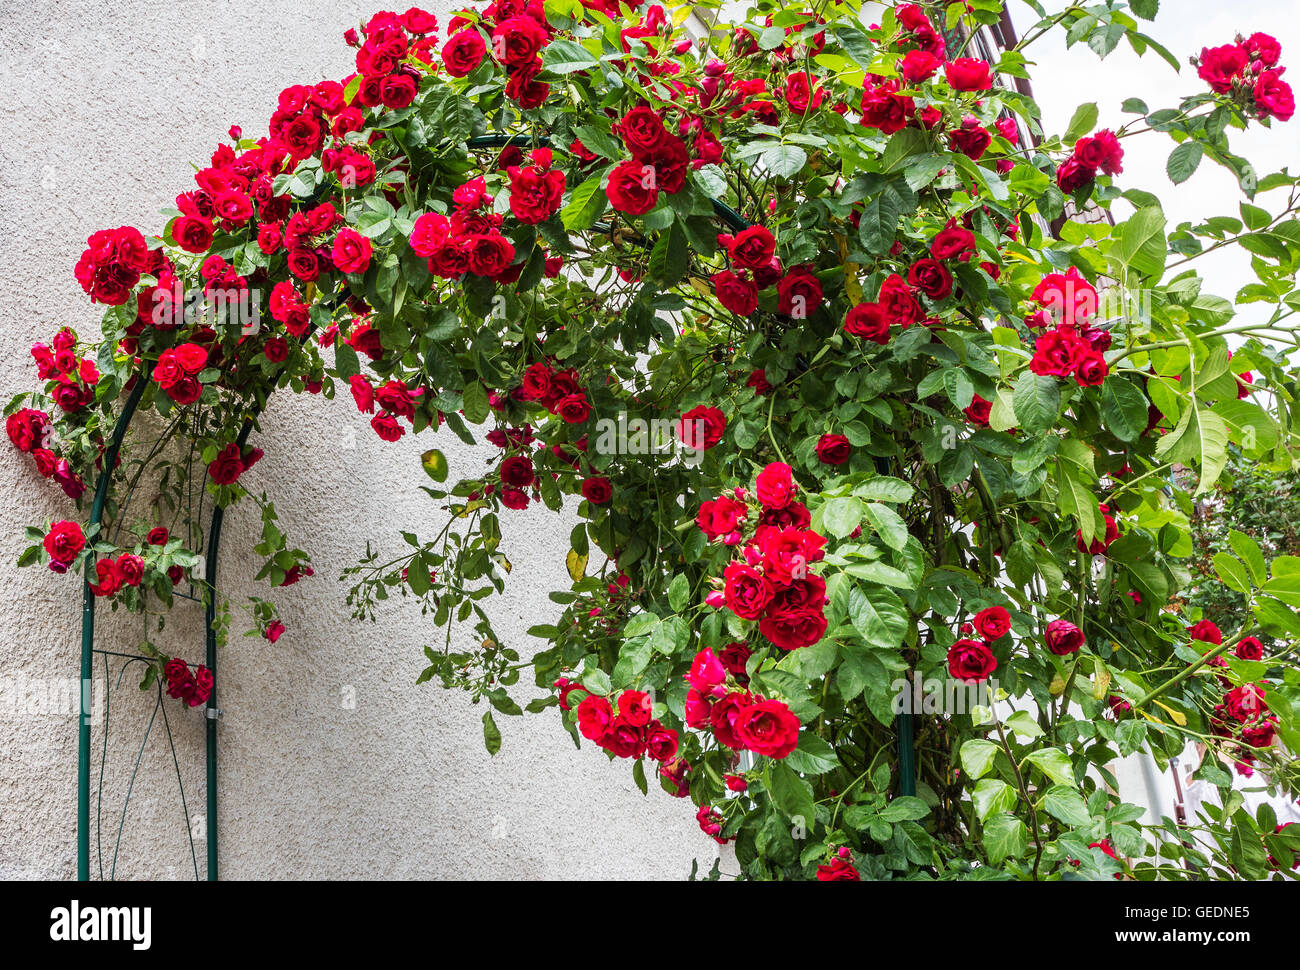 Red climbing roses Stock Photo